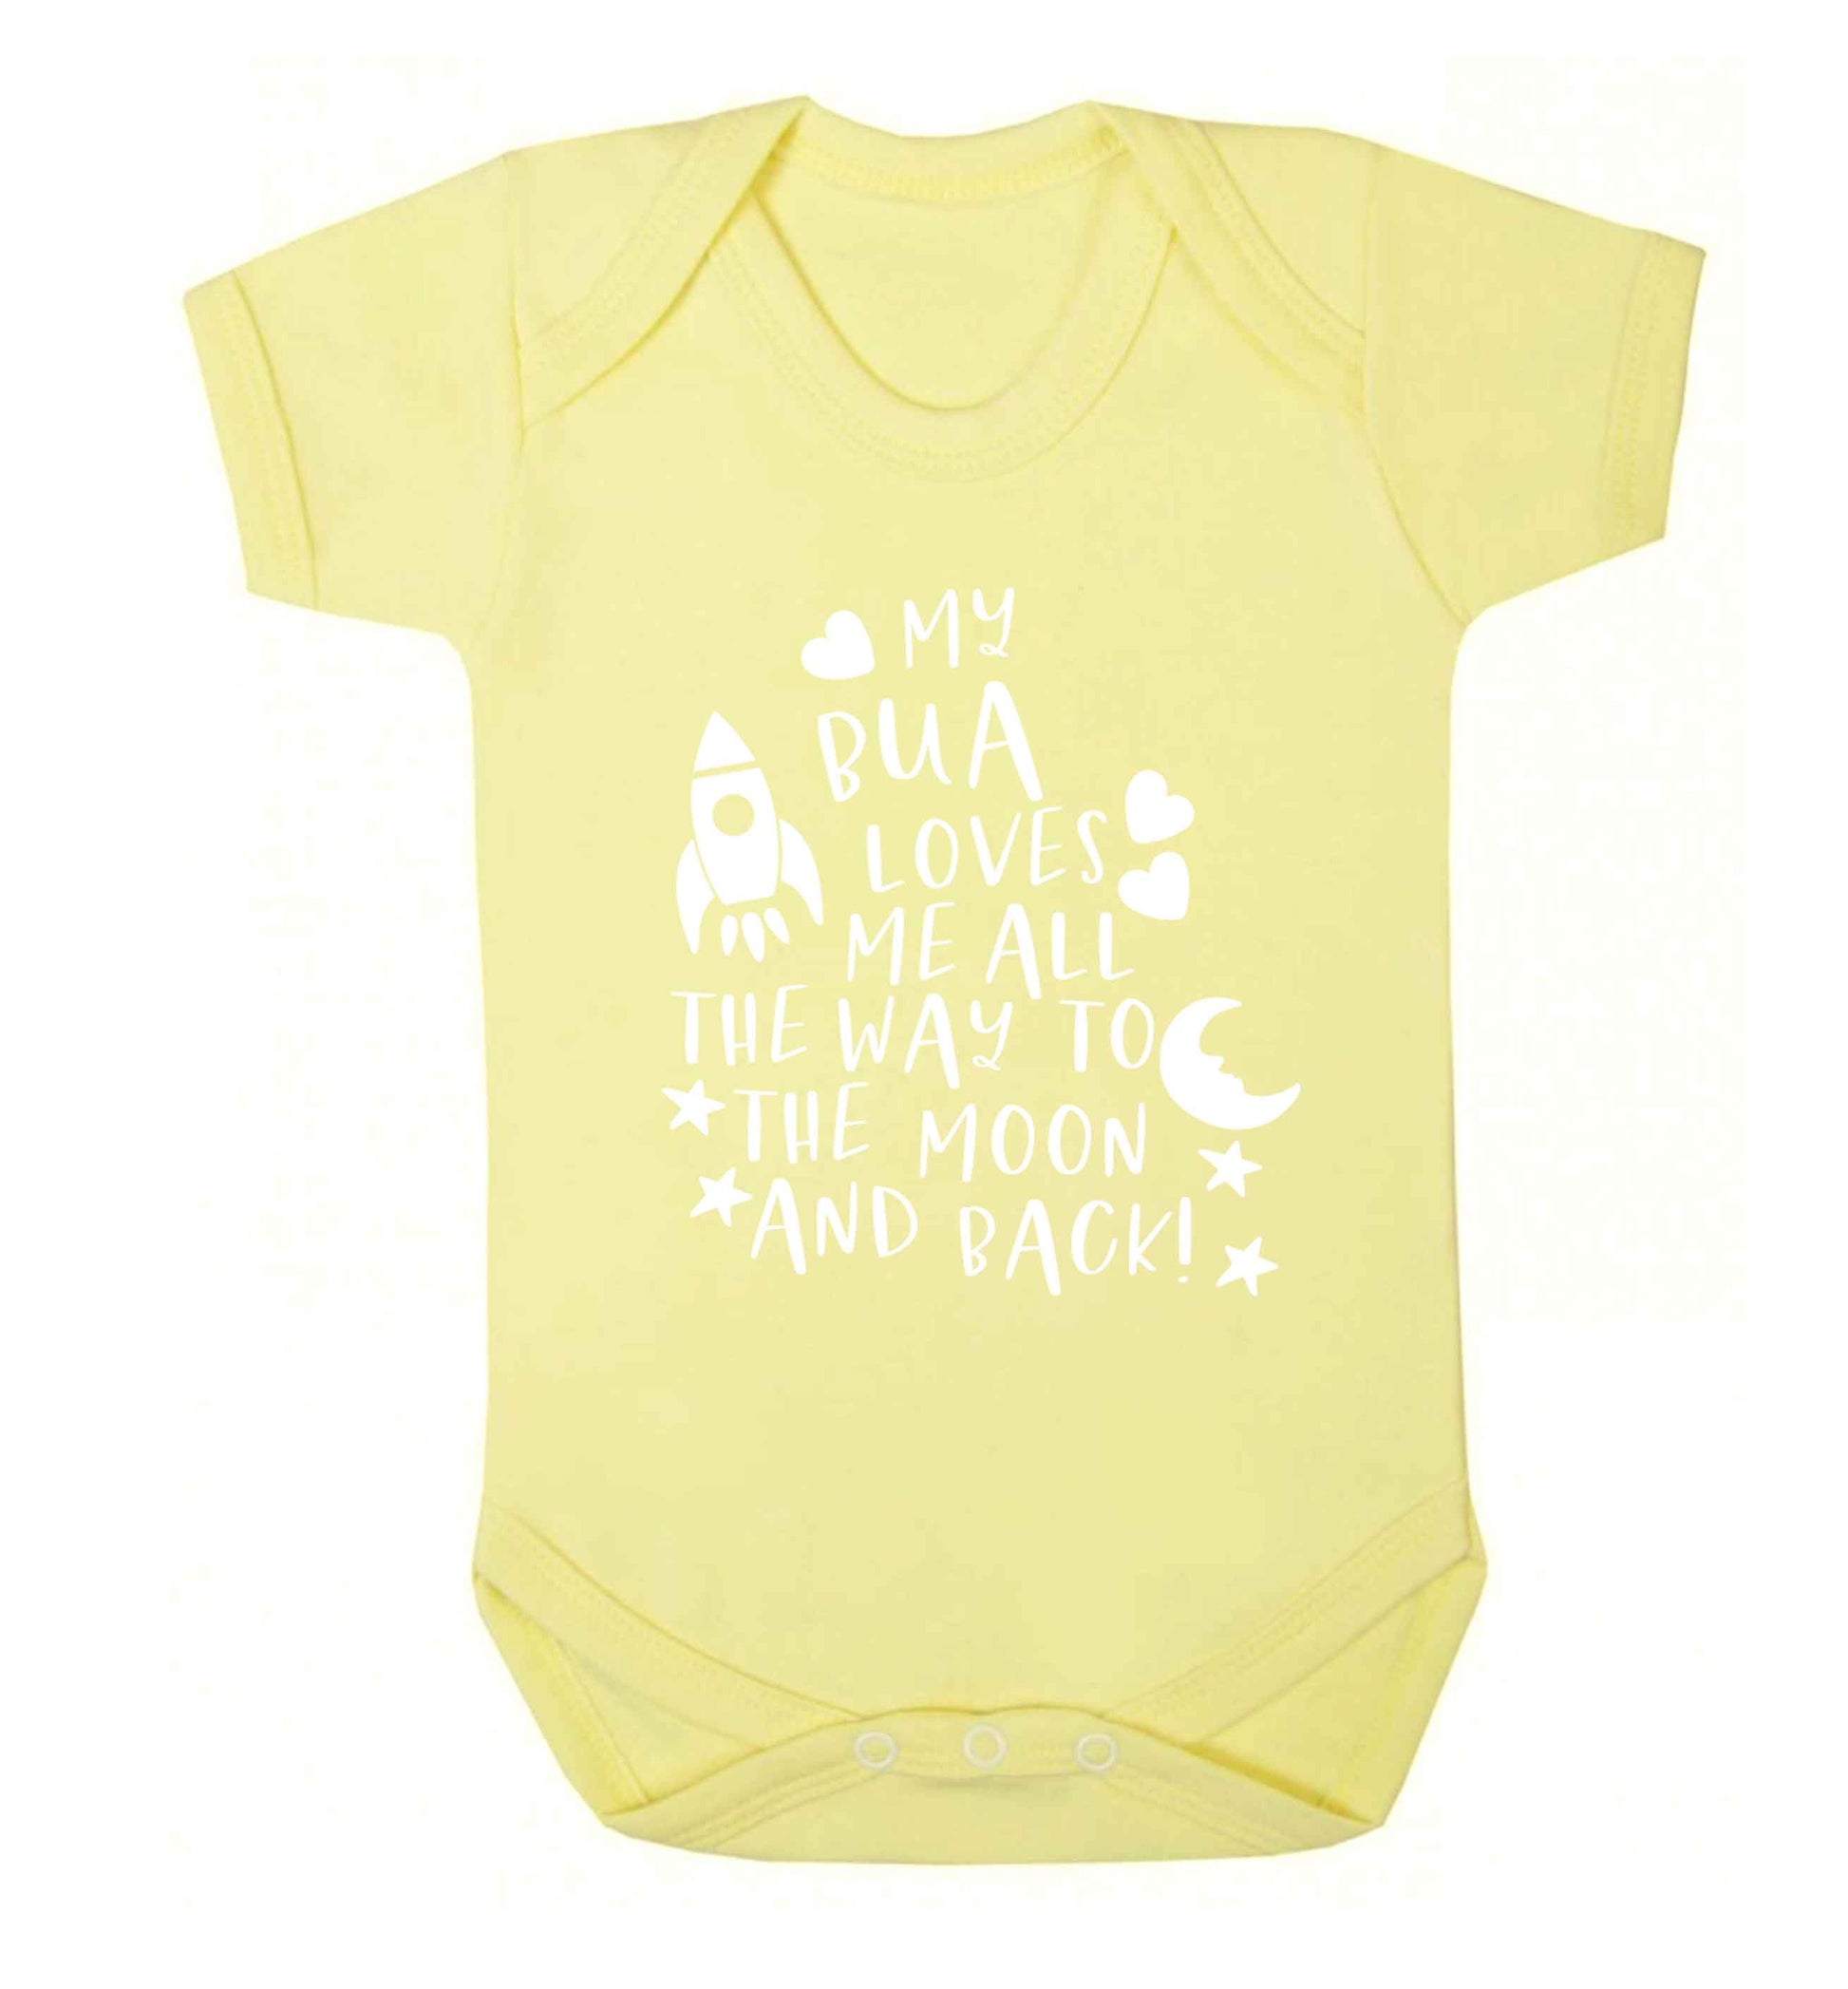 My bua loves me all they way to the moon and back Baby Vest pale yellow 18-24 months